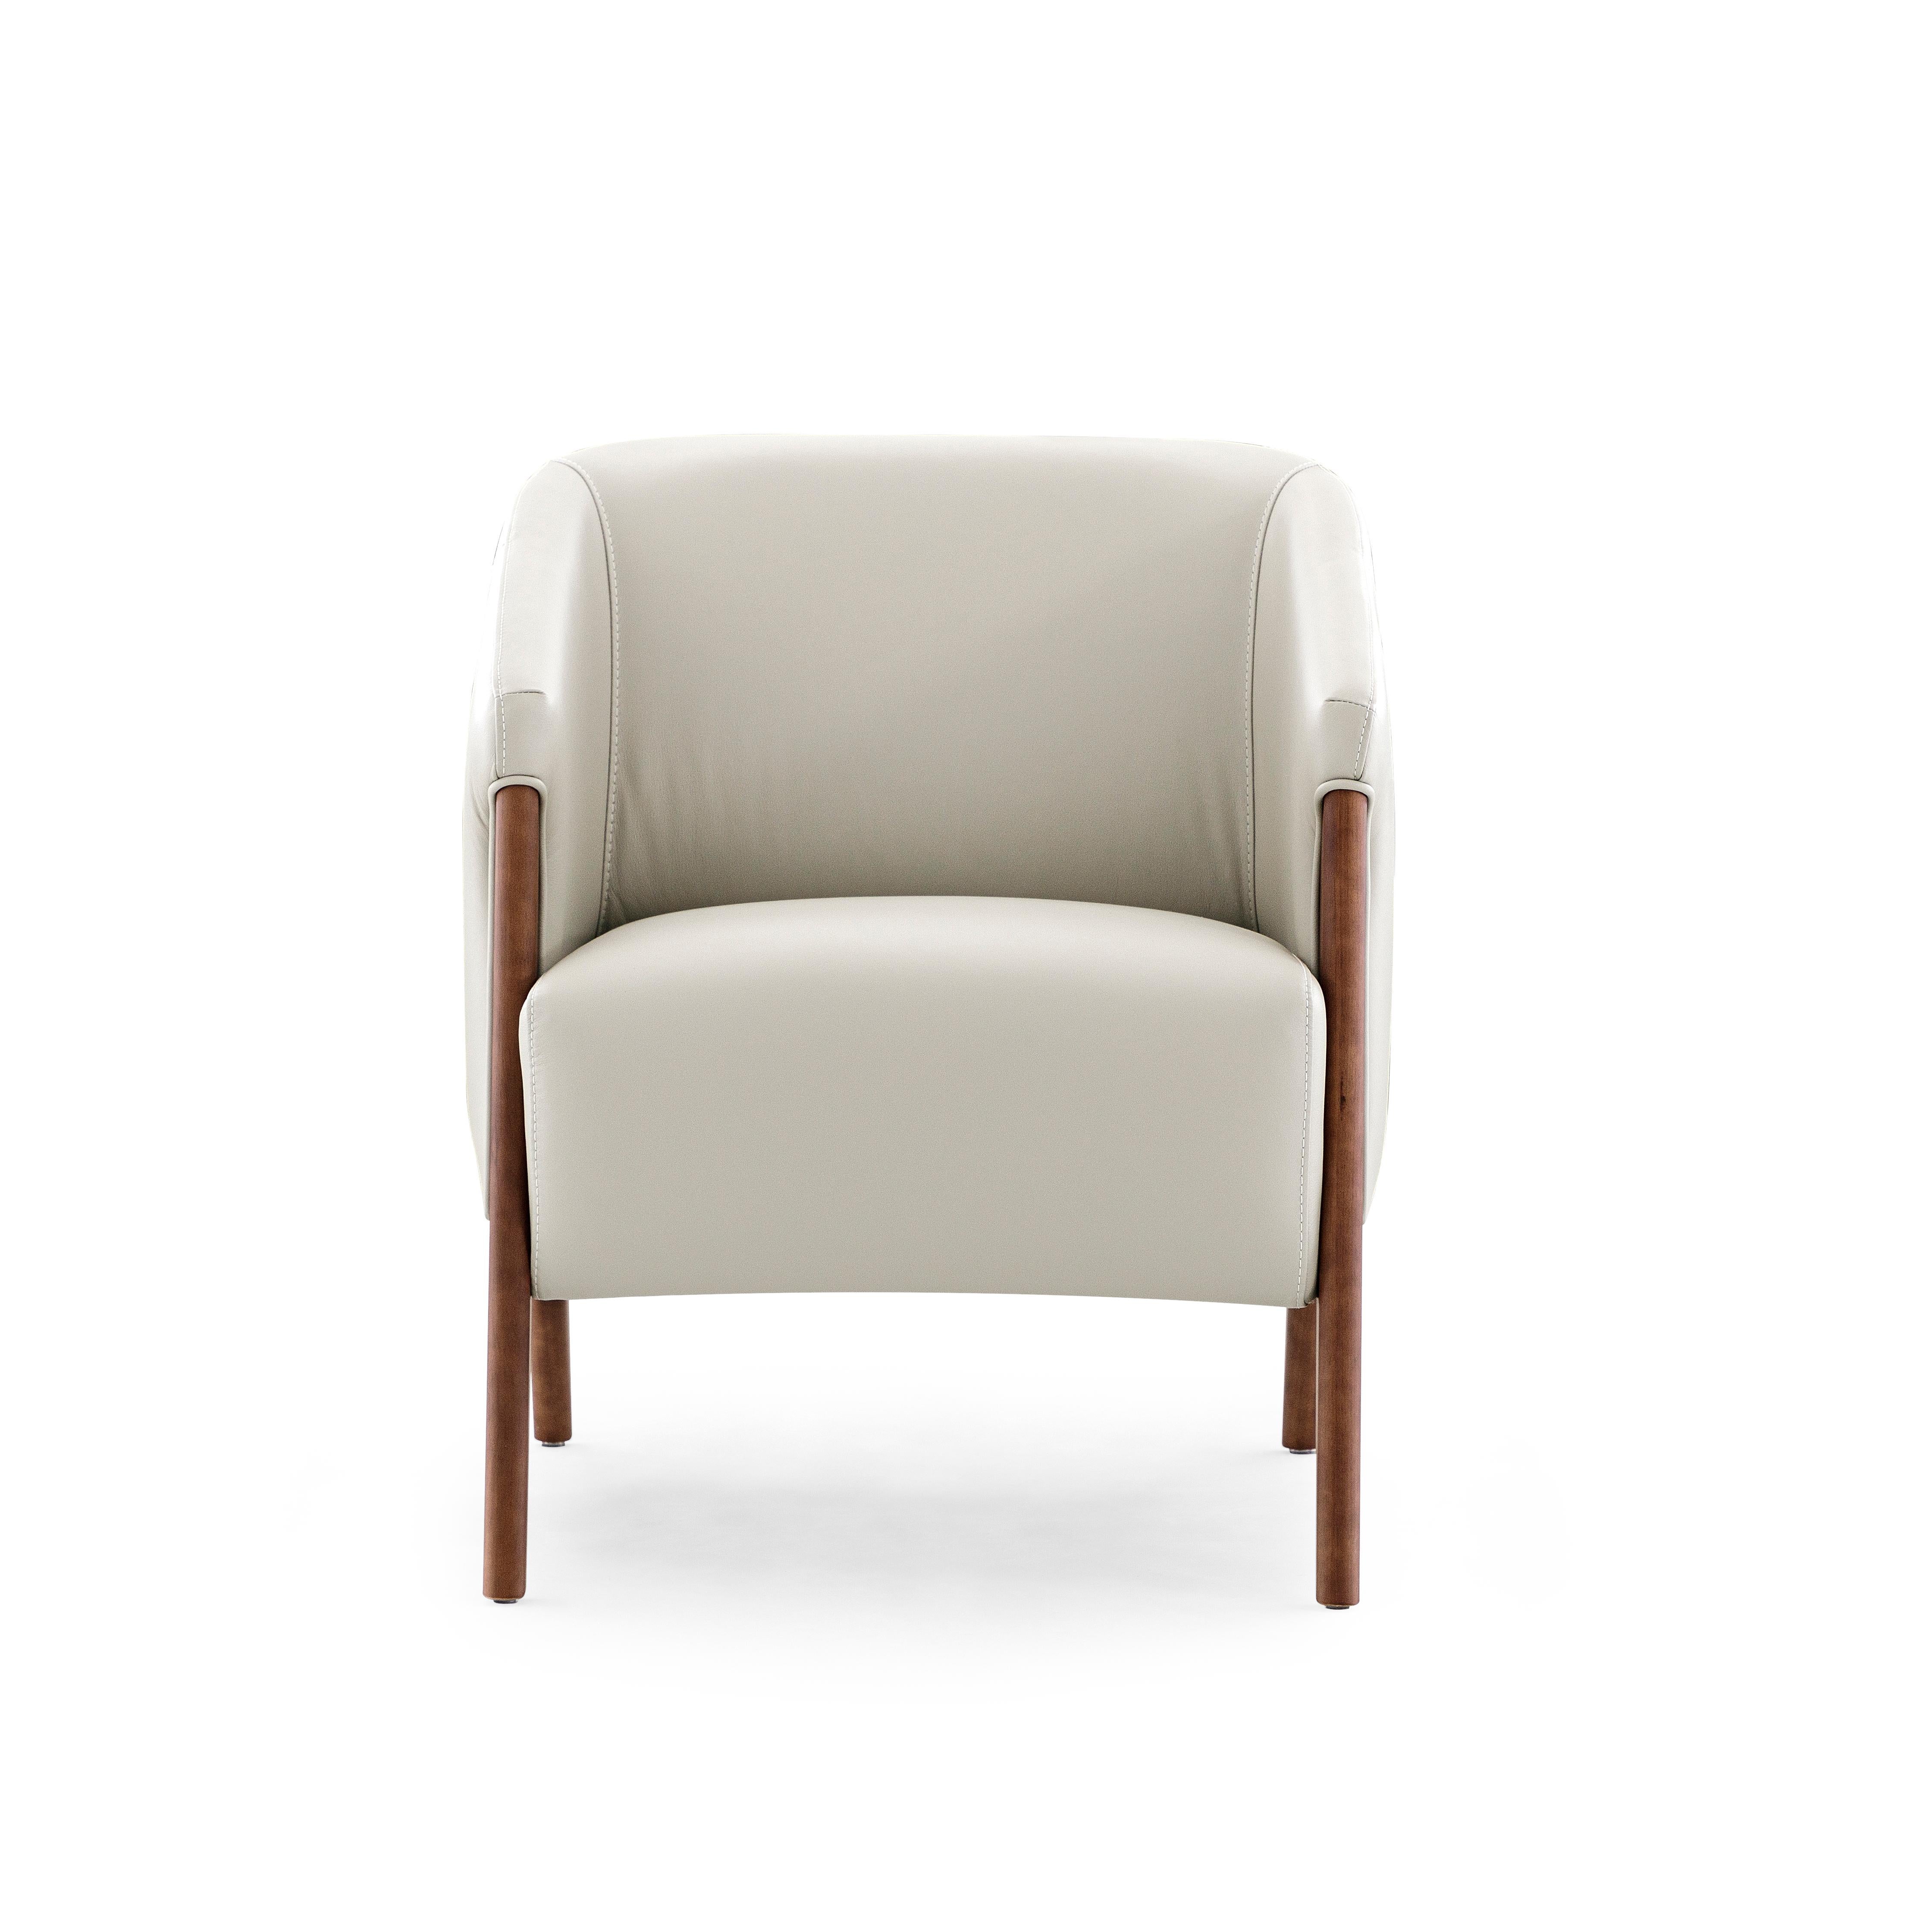 The Abra armchair is a welcoming addition to any room in your decor, with beautiful white leather upholstery and a walnut wood finish frame. This armchair has been created by our amazing team of architectors and designers from Uultis in order to